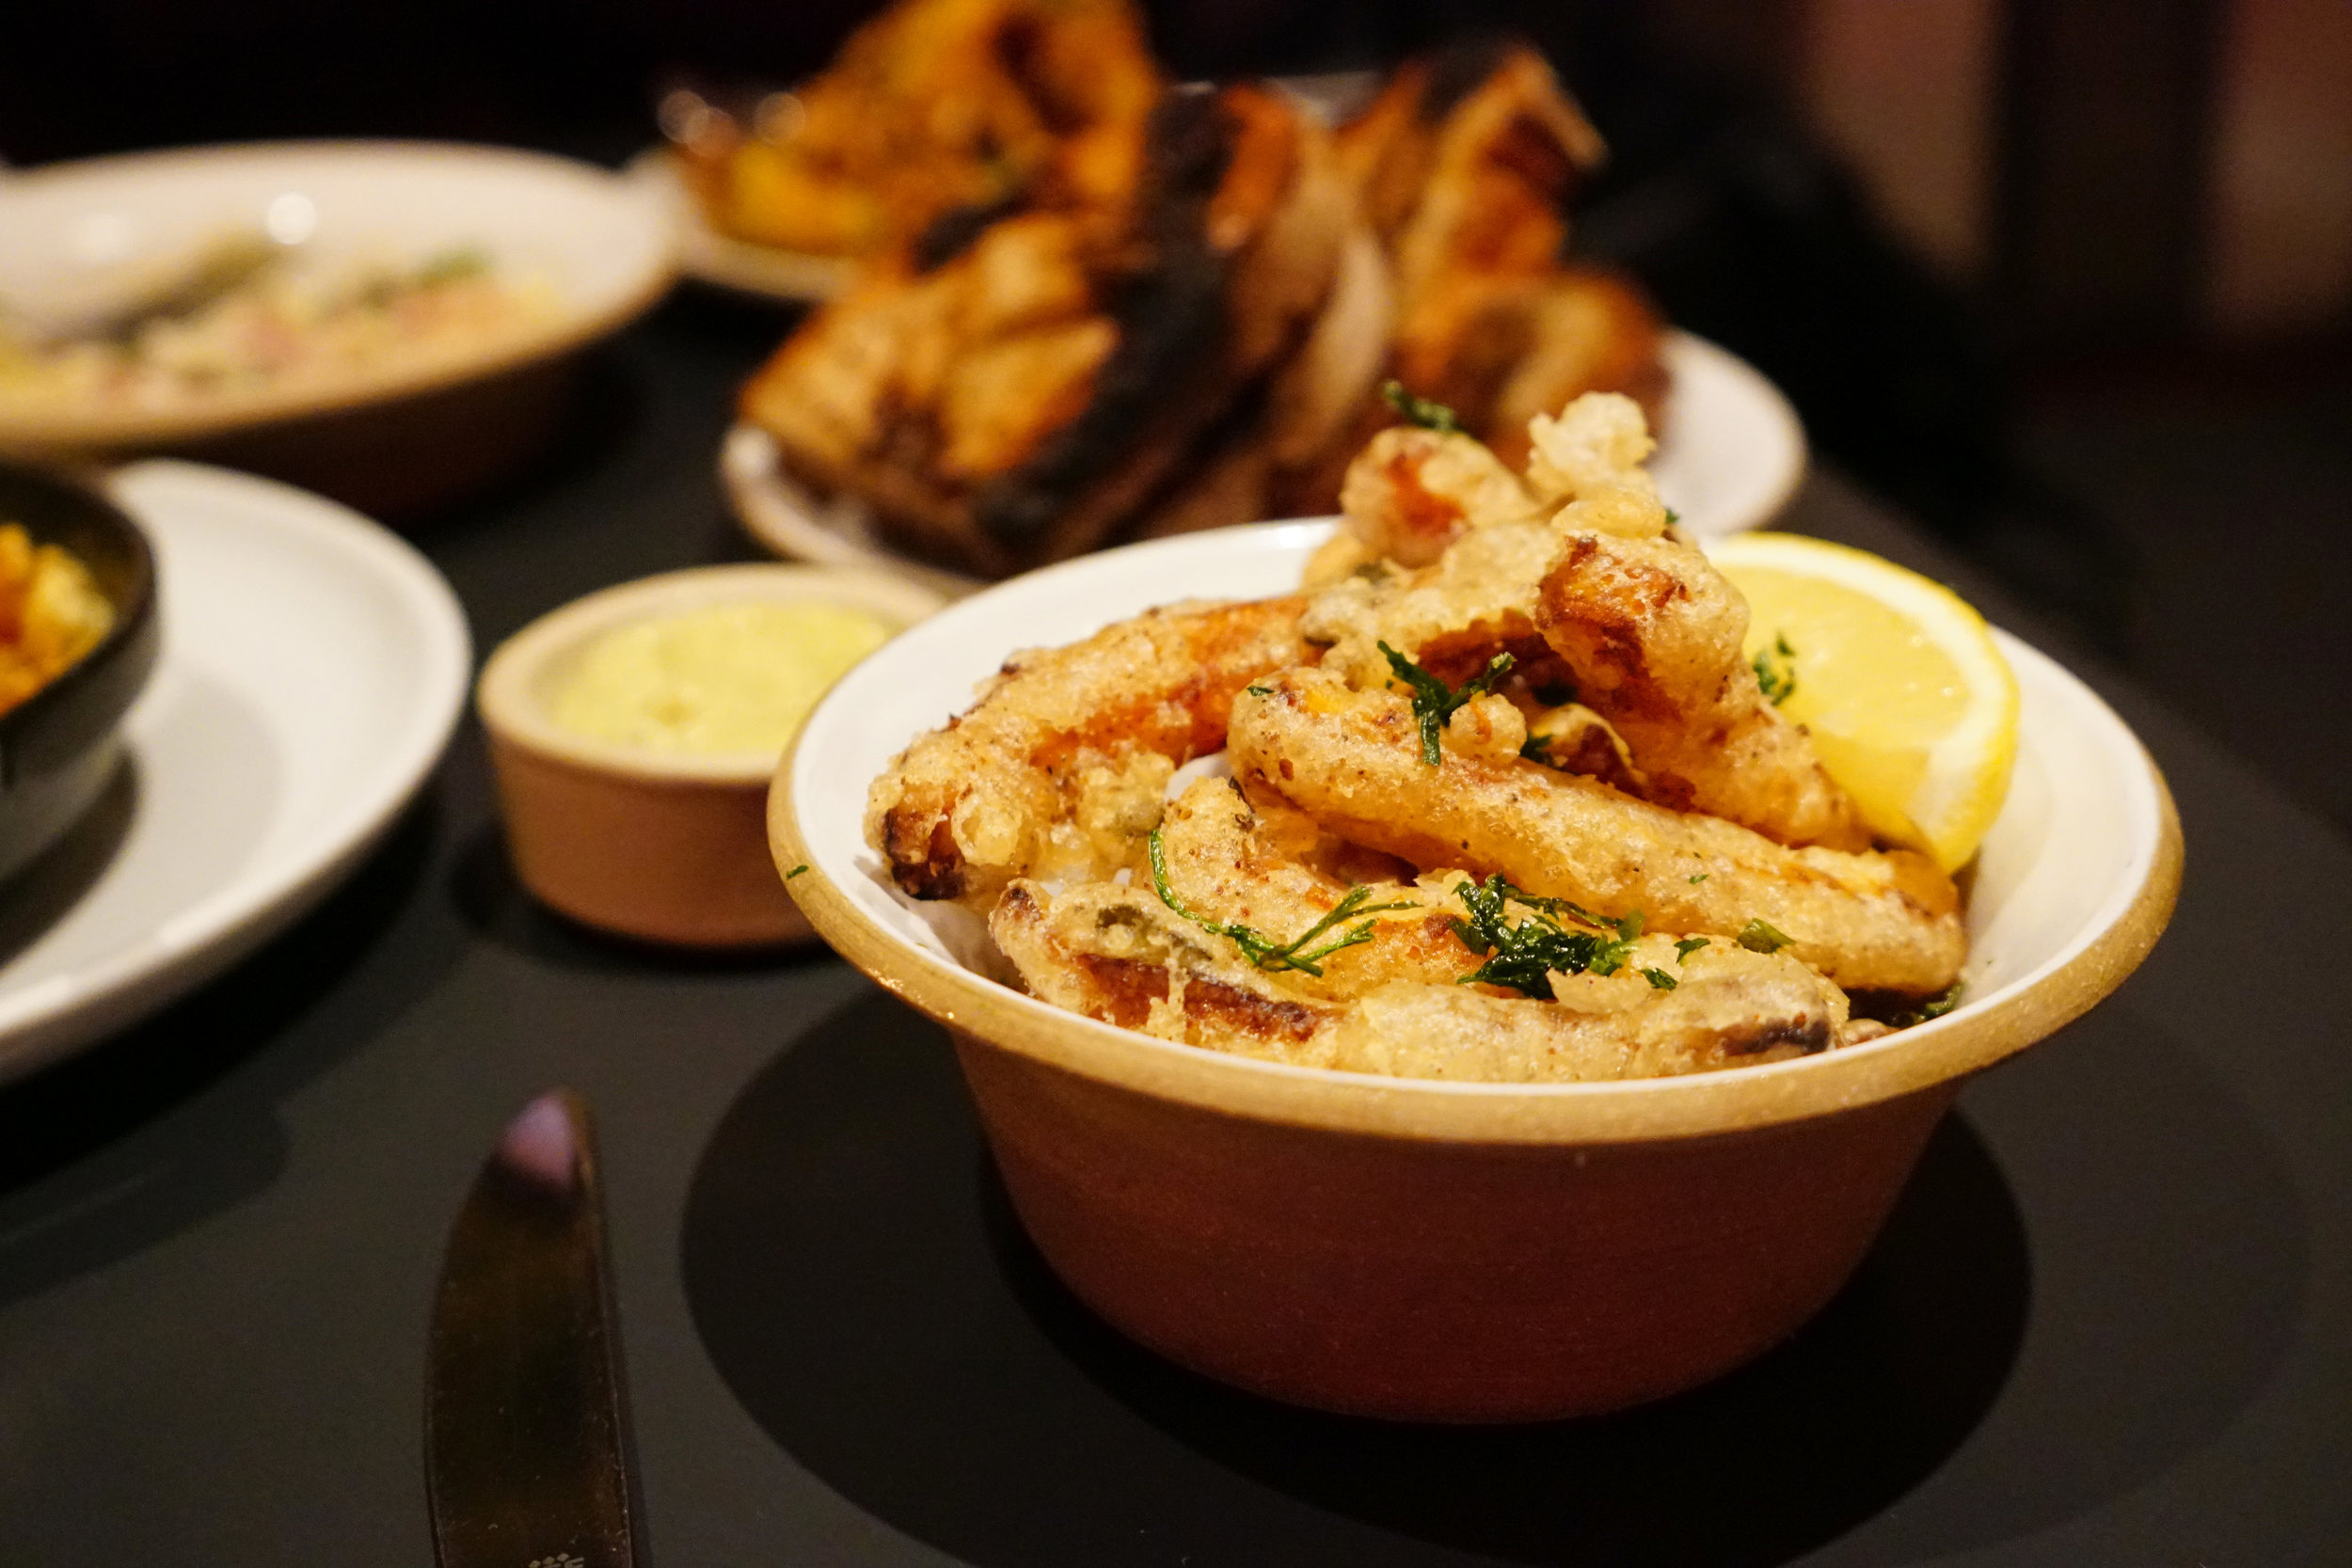 Butternut 'Fries' with Lemon-Parmesan Dressing at Loring Place in New York City